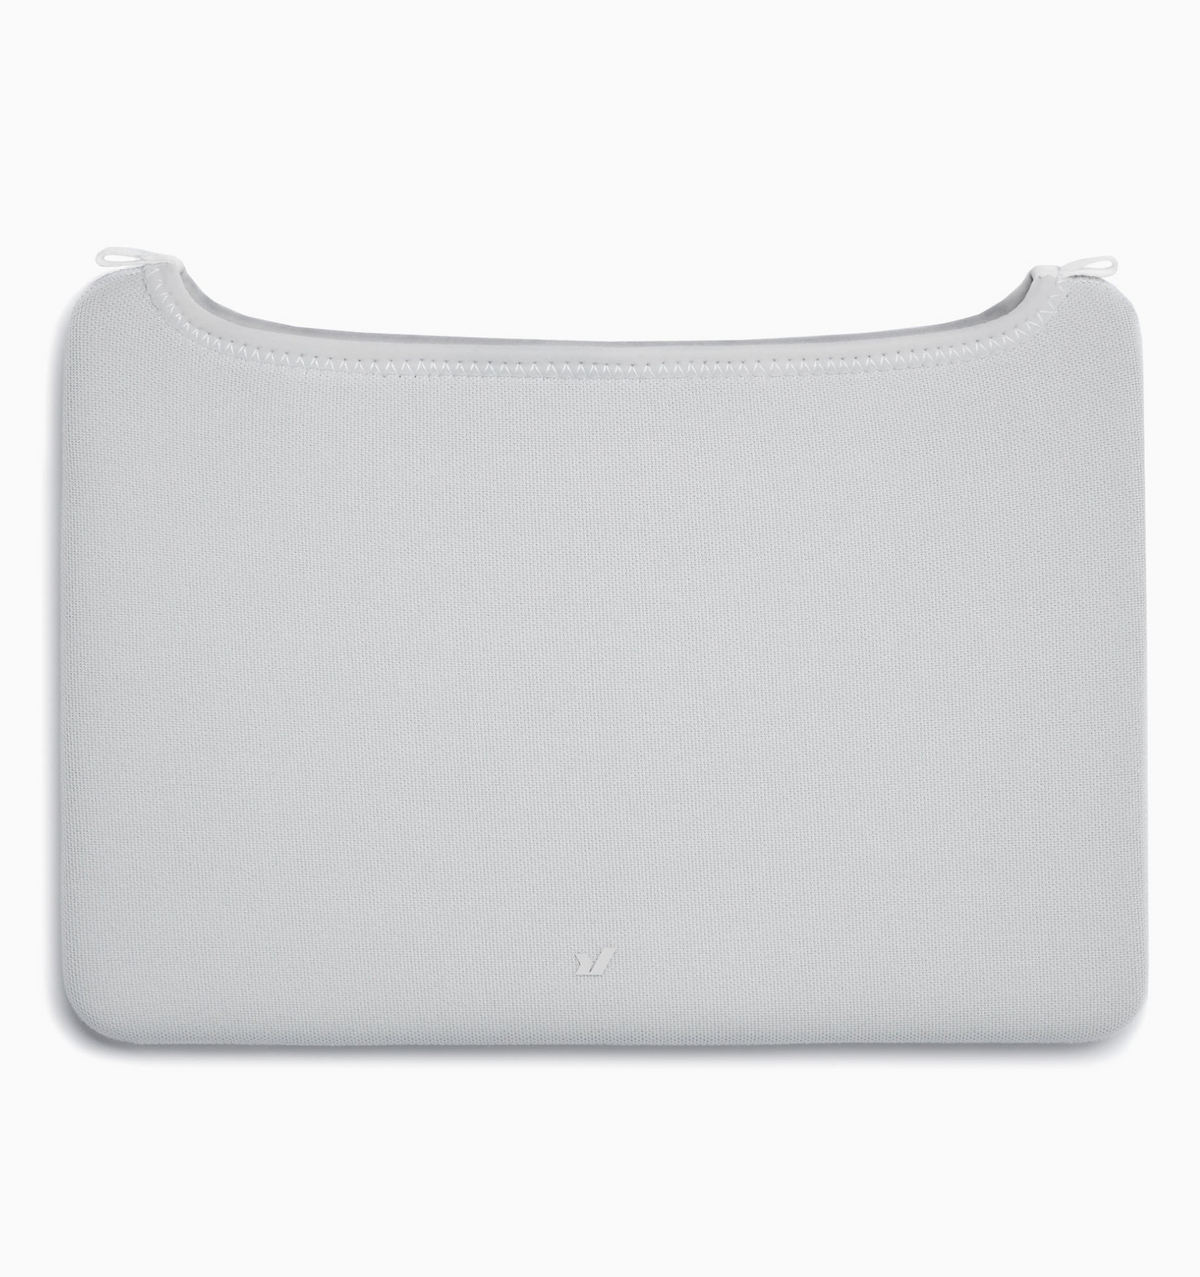 Rushfaster Laptop Sleeve For 15/16" MacBook Pro (Touch Bar)